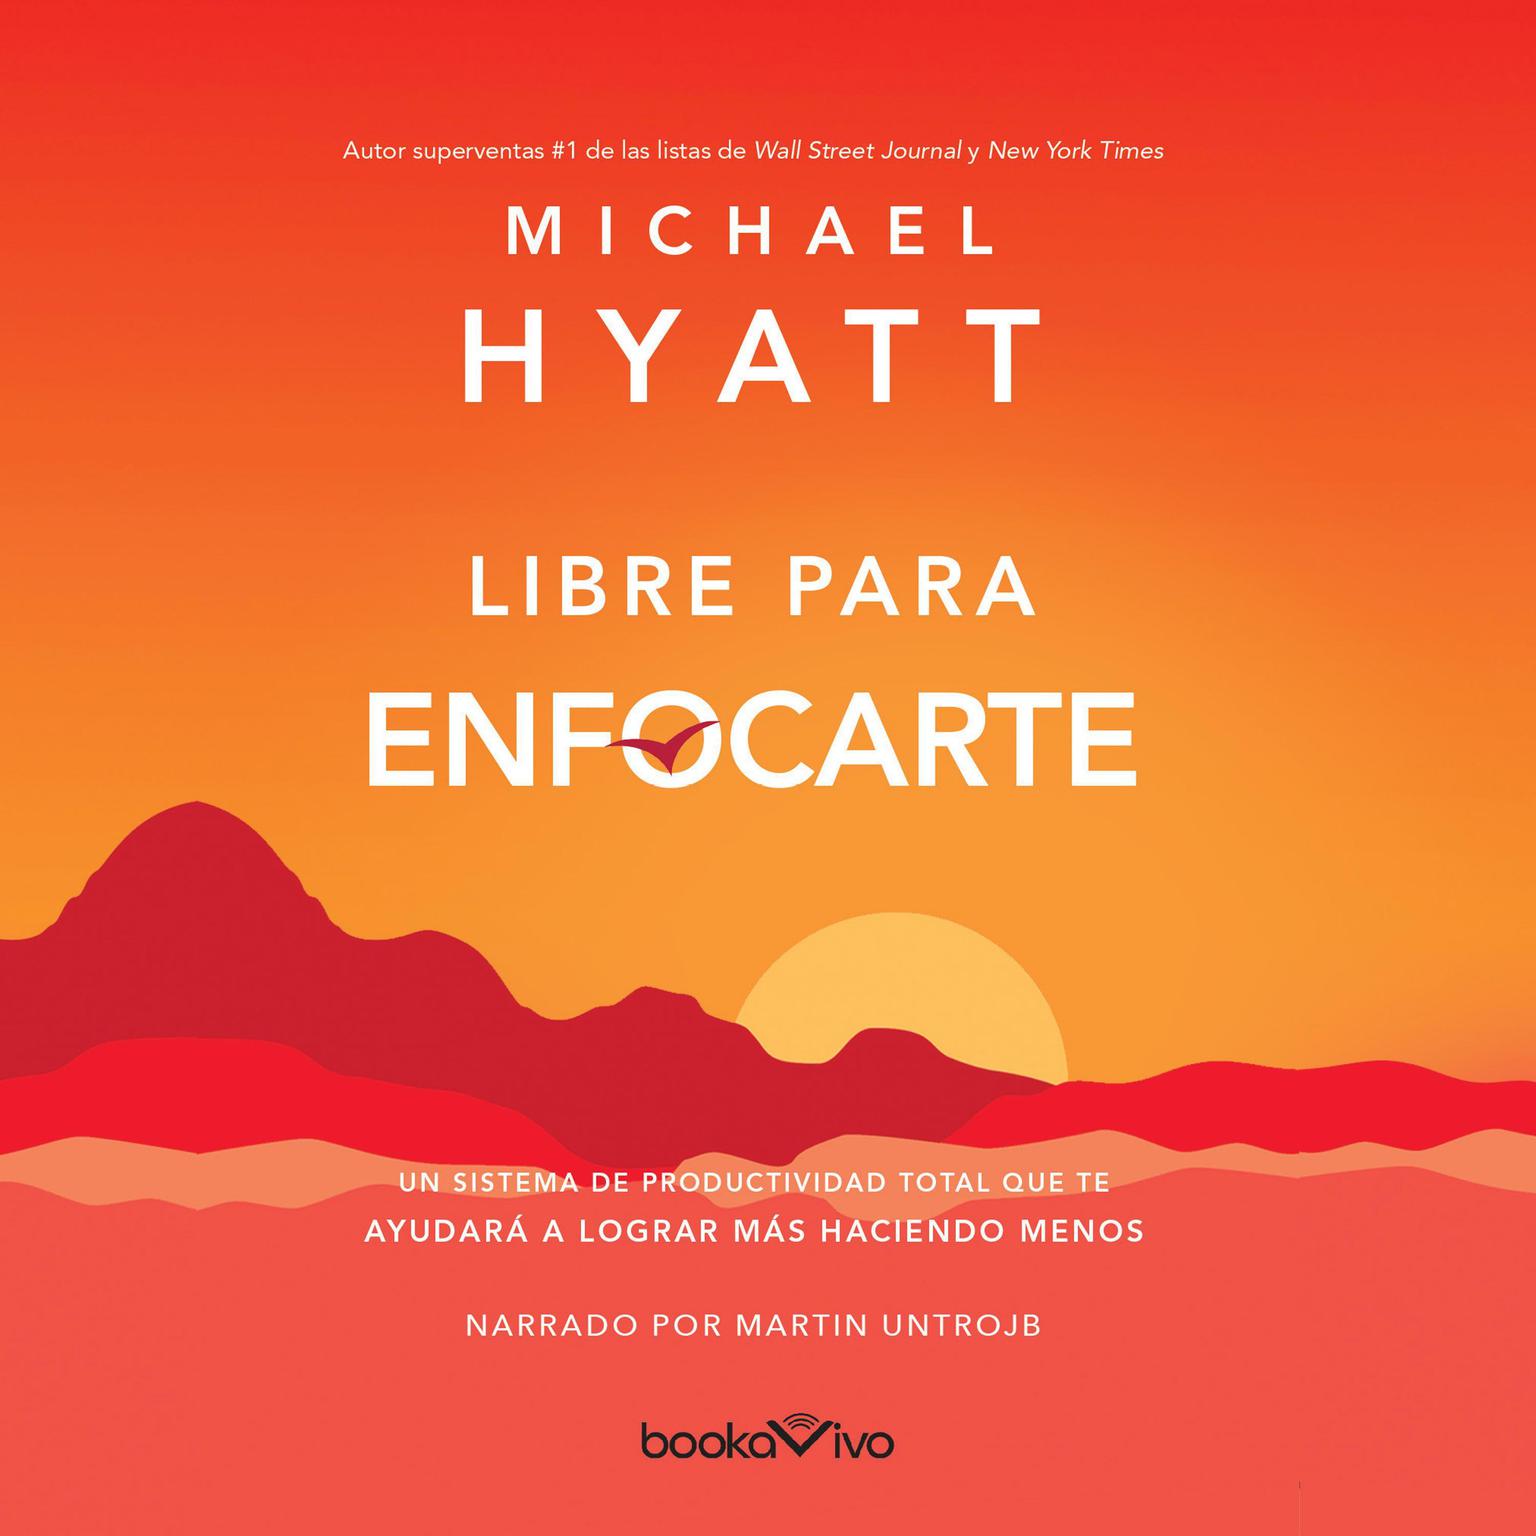 Libre para enfocarte (Free to Focus): A Total Productivity System to Achieve More by Doing Less Audiobook, by Michael Hyatt